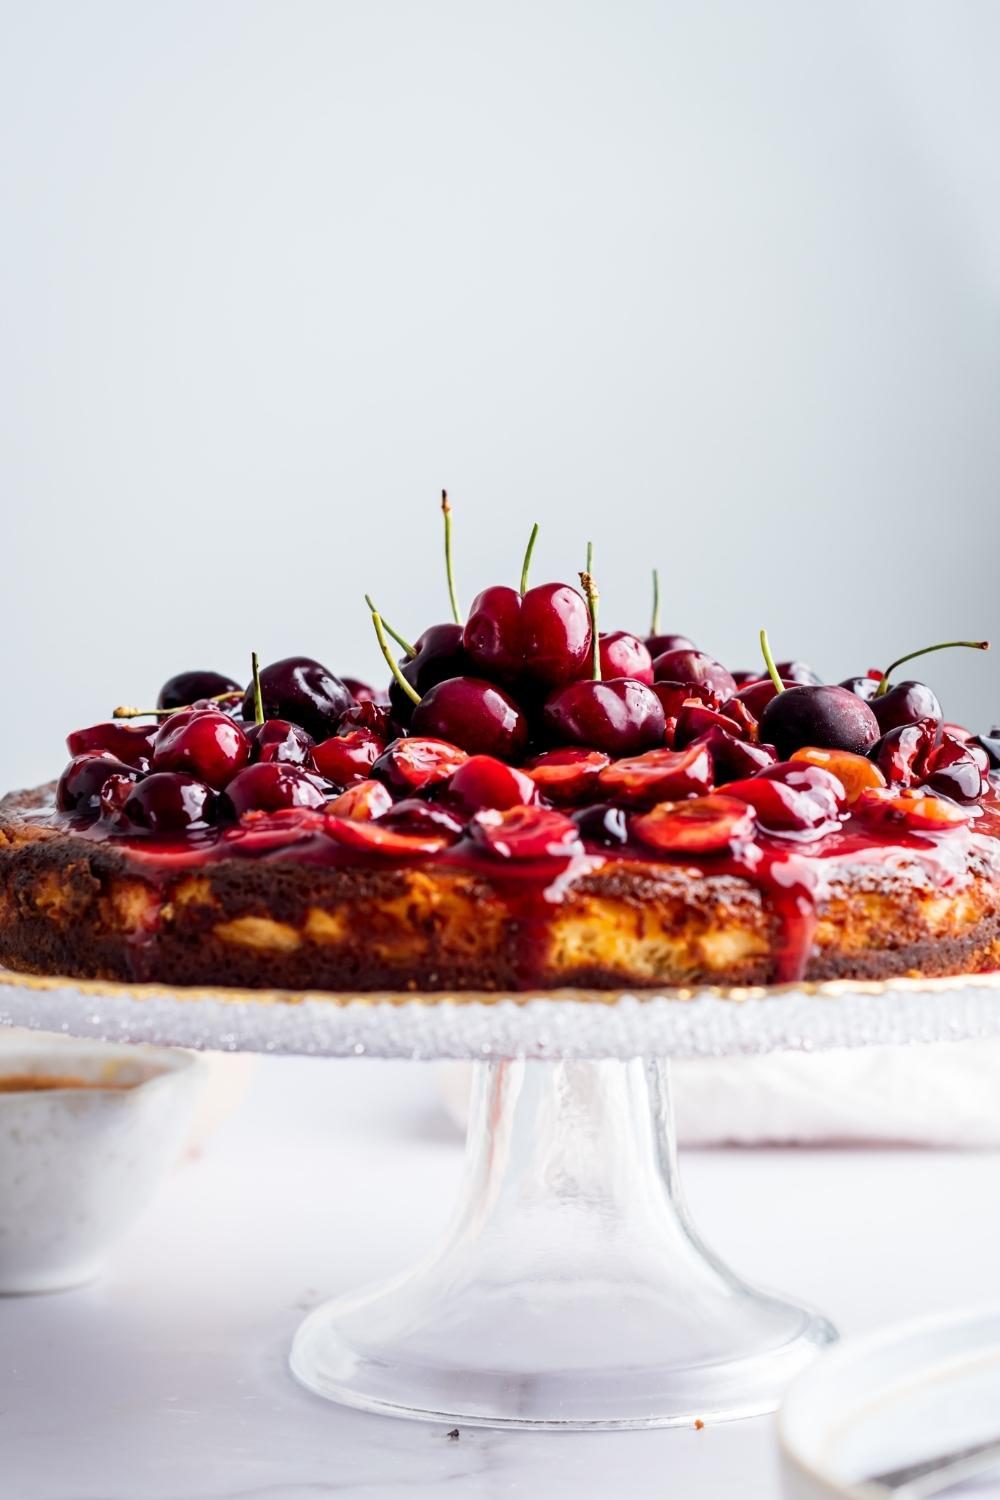 A cherry cheesecake piled high with cherries on a cake stand.